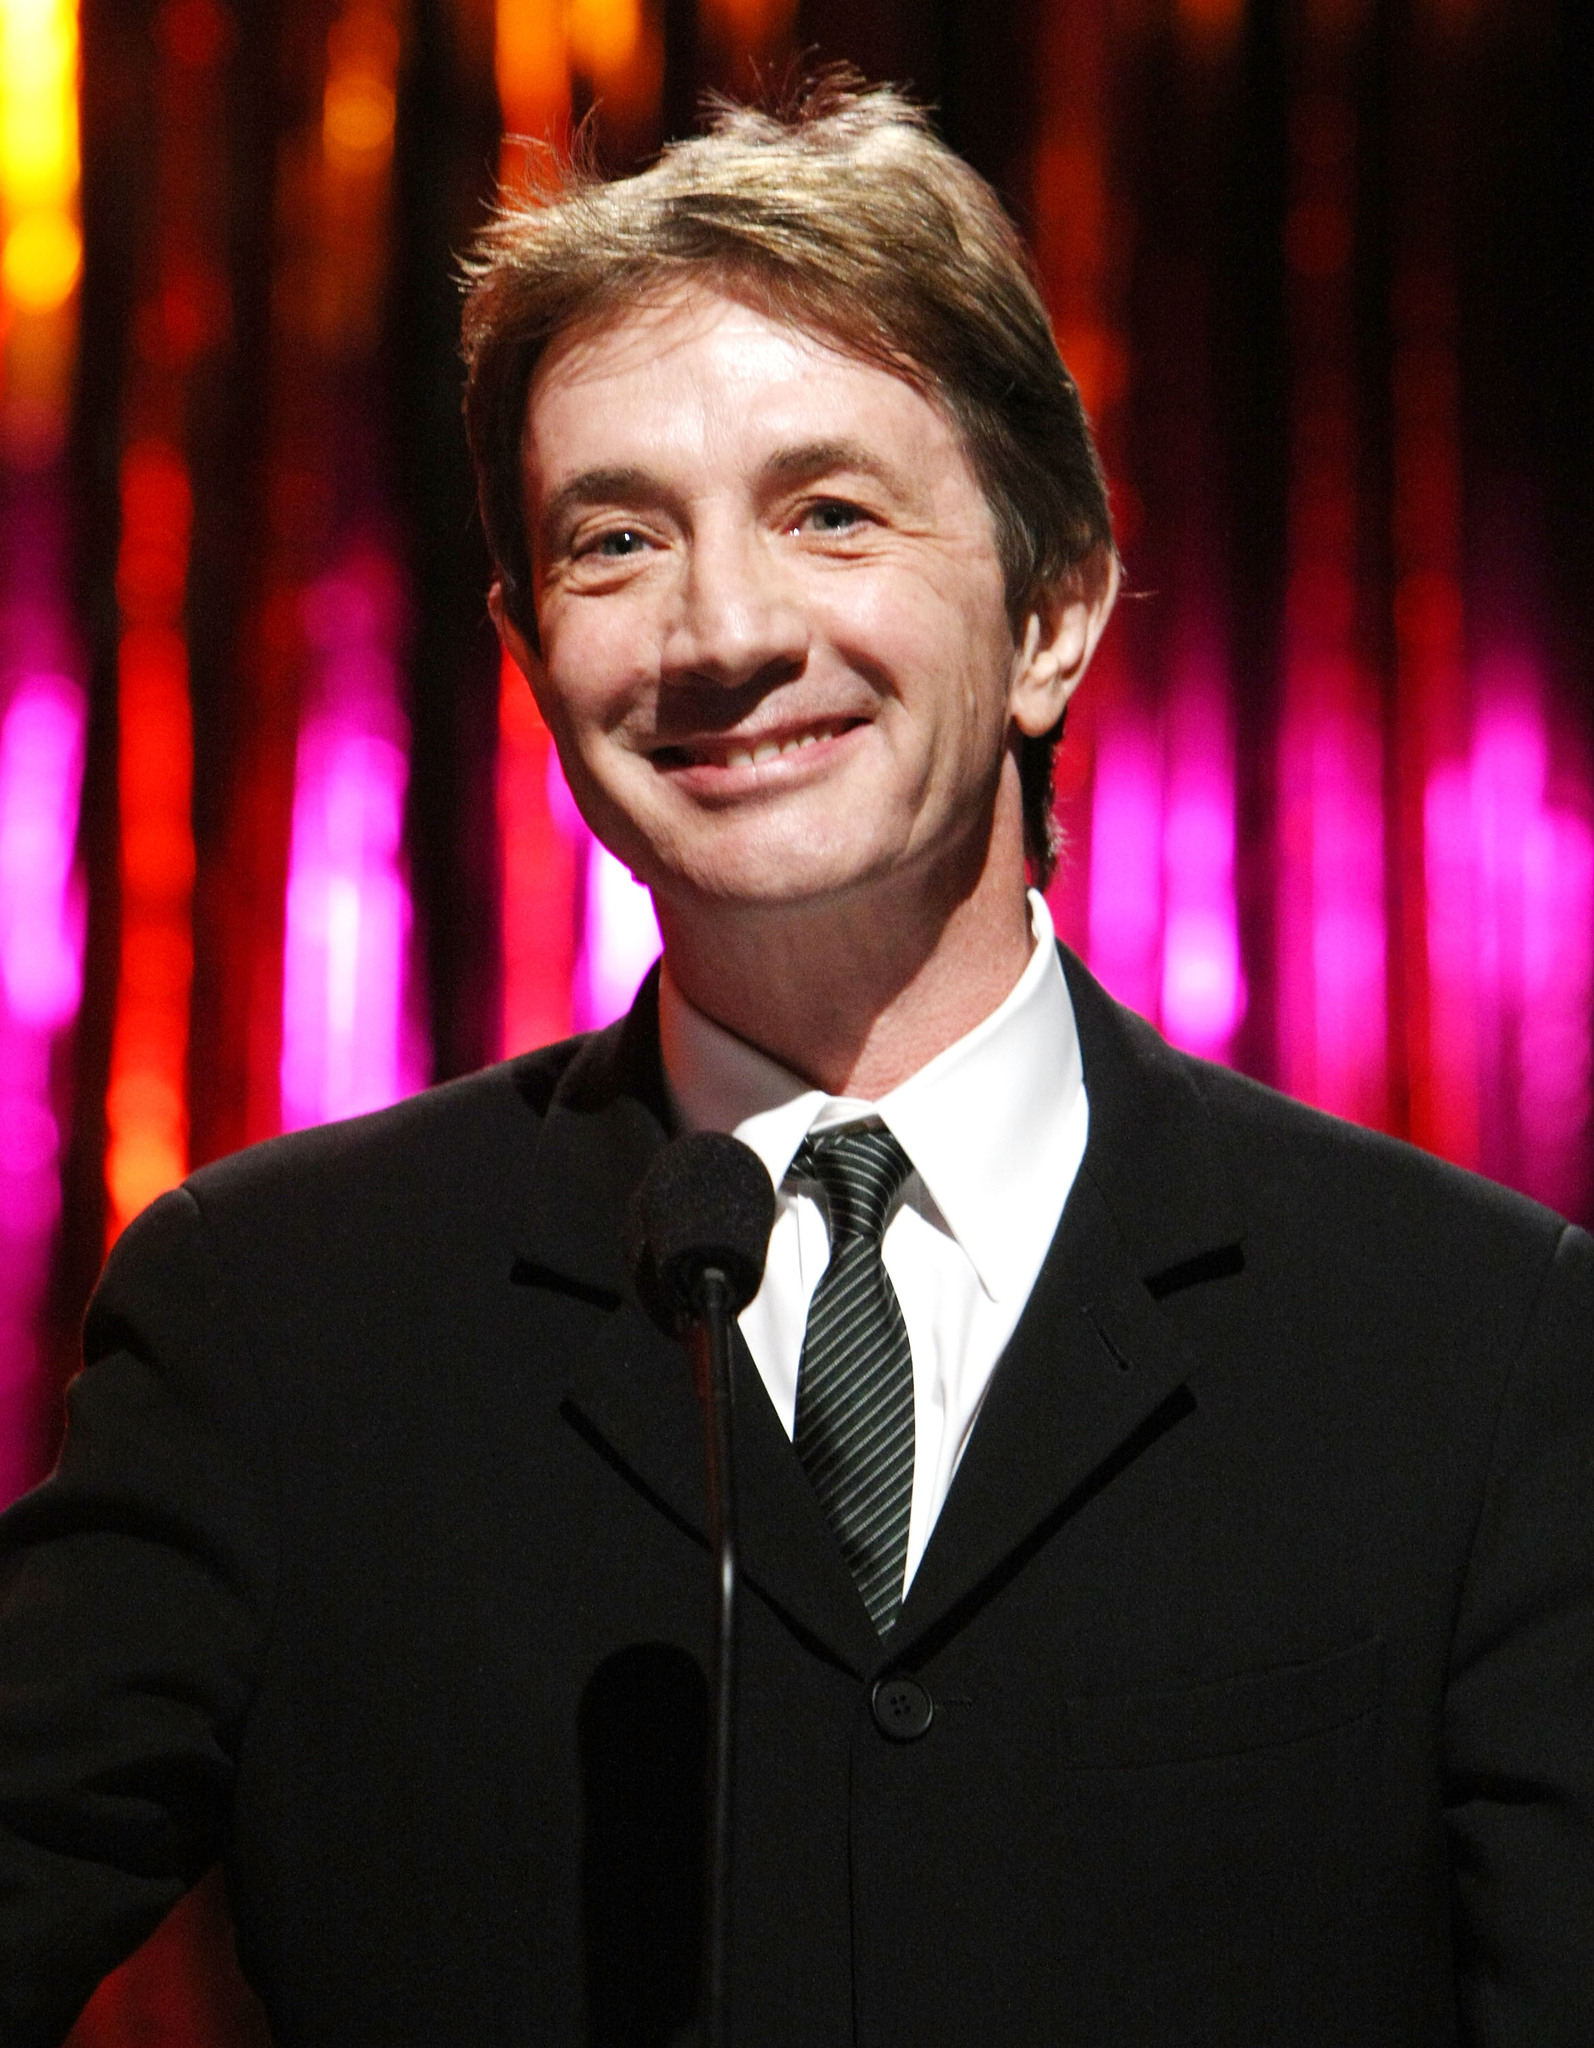 ← Martin Short pictures.